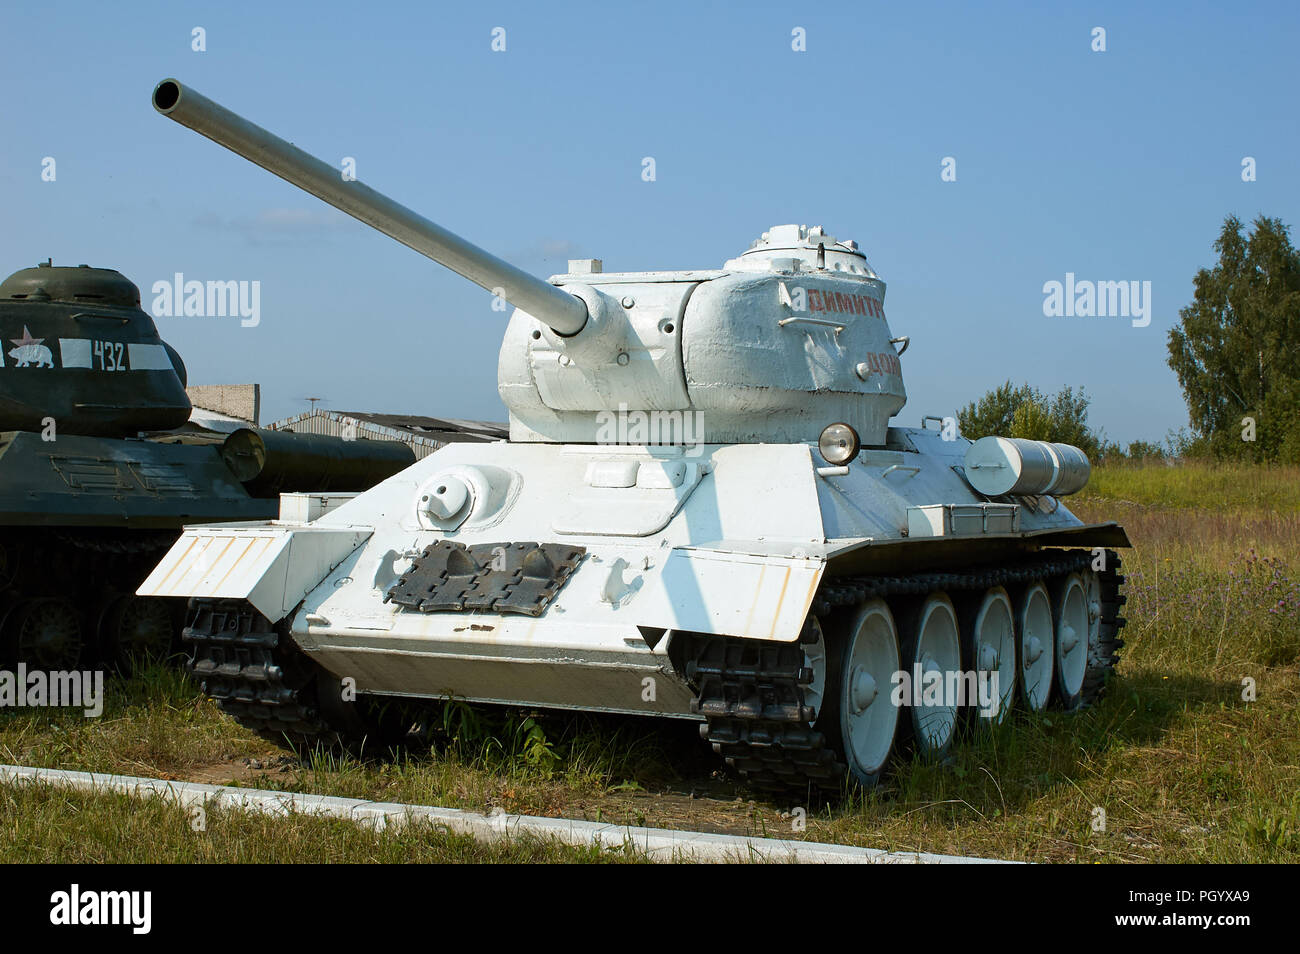 MOSCOW REGION, RUSSIA - JULY 30, 2006: Tank T-34 built by the Soviet Union at the beginning of World War II, the Tank Museum, Kubinka near Moscow Stock Photo